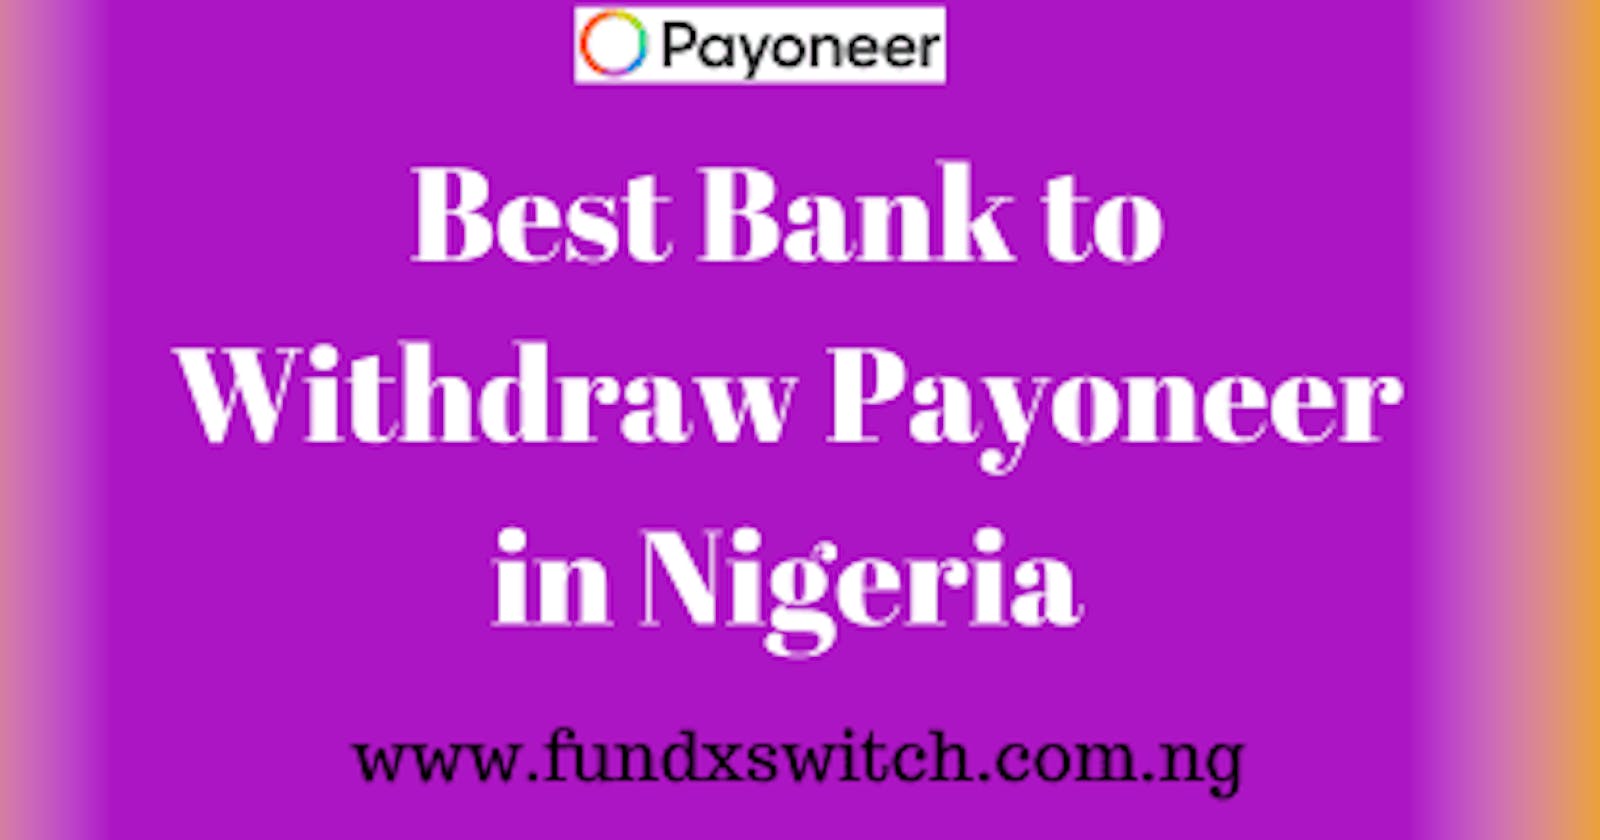 Best Bank To Withdraw Payoneer In Nigeria